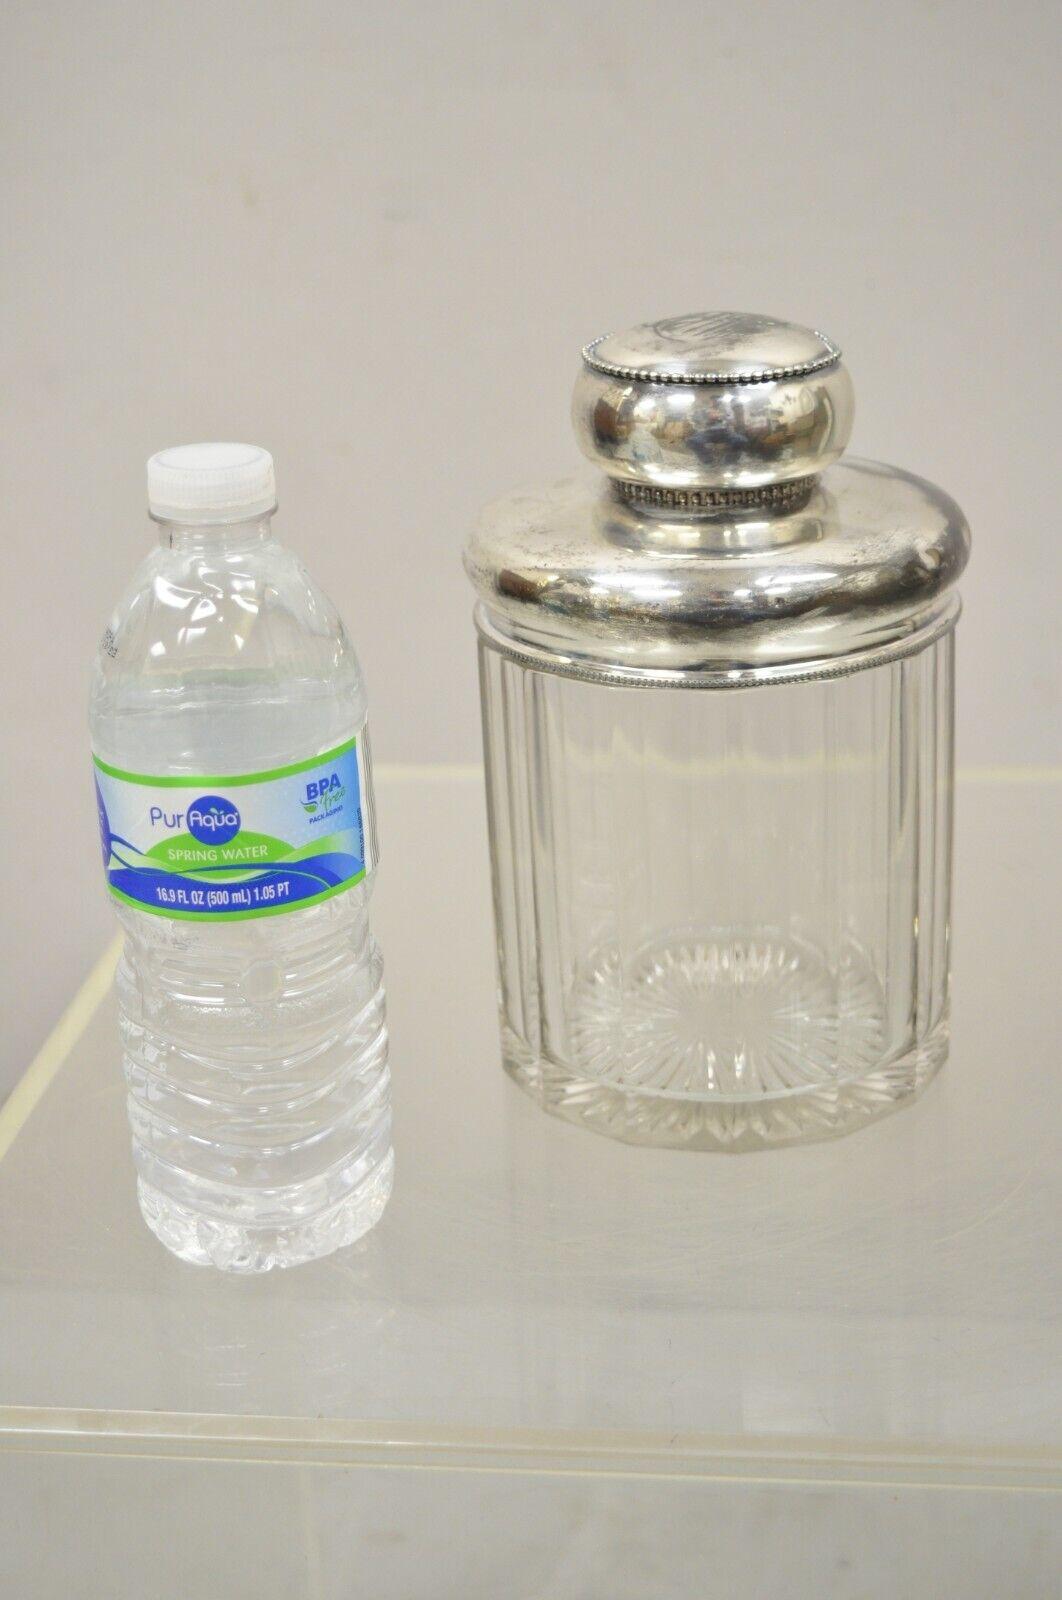 Antique Art Nouveau silver plated lid cotton swab lidded crystal vanity jar. Item features silver plated lid, cut glass crystal jar, monogram to top of lid, unmarked. 19th century. Measurements: 8